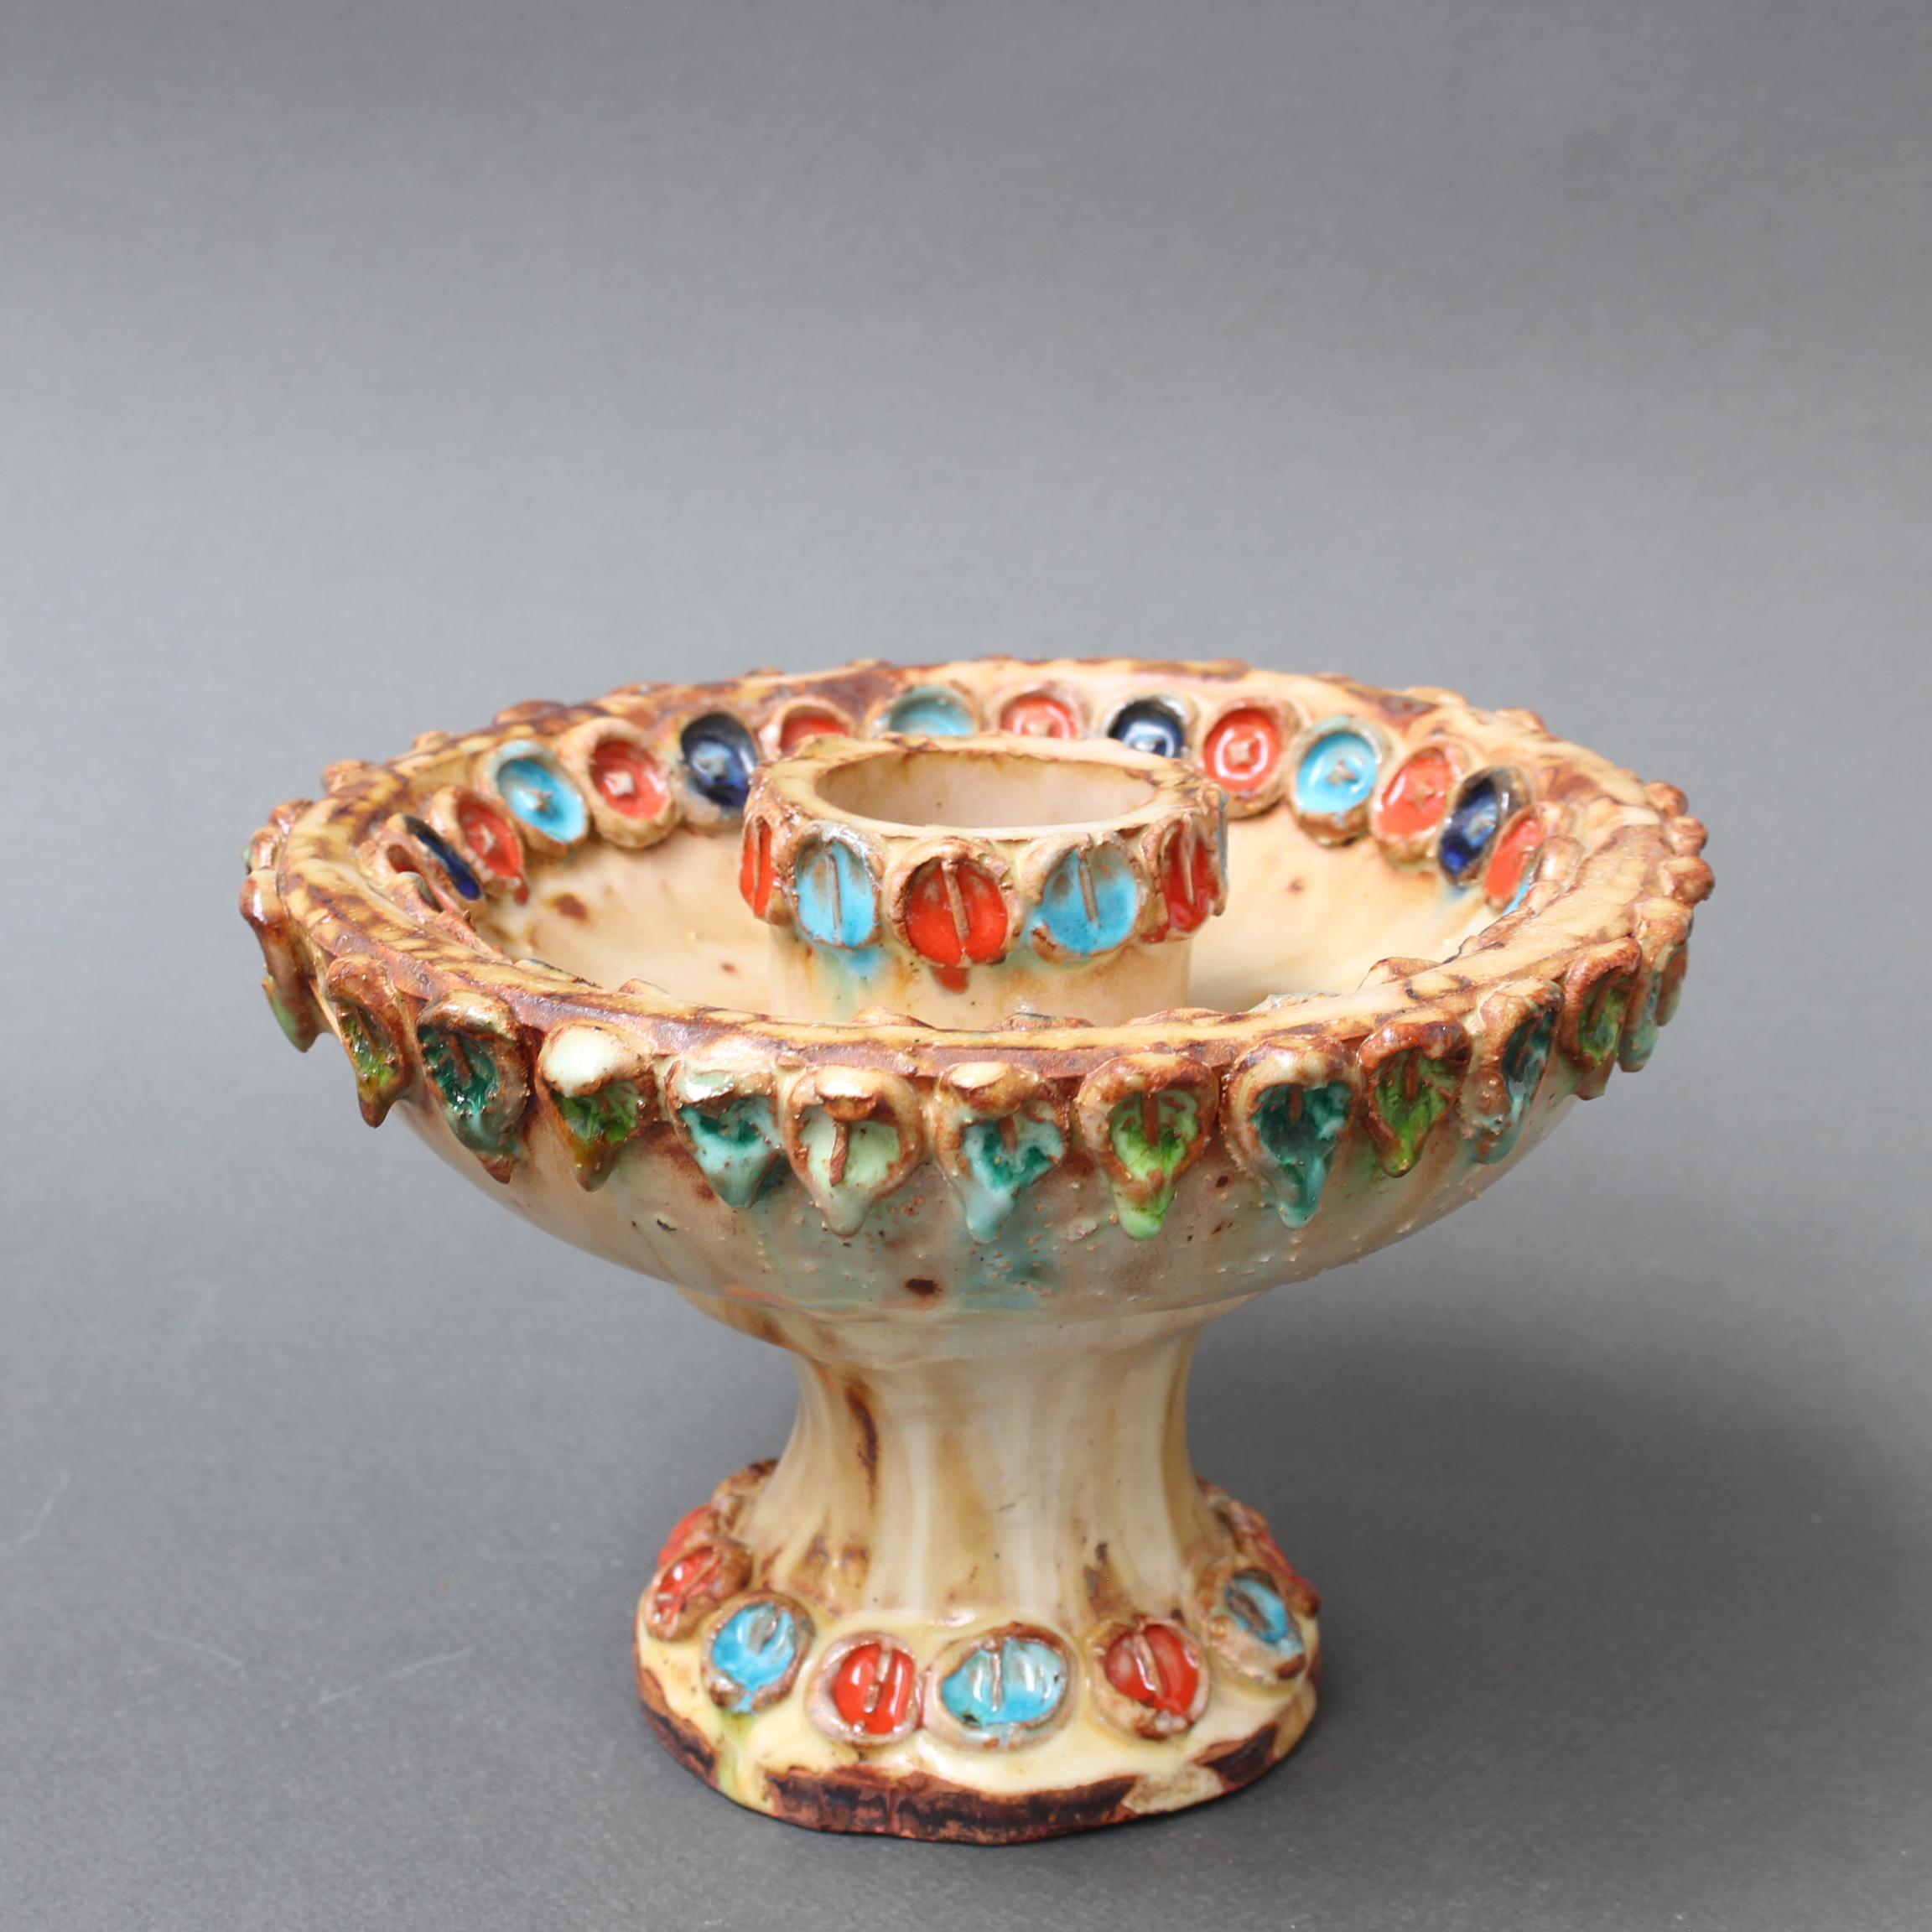 Vintage French ceramic flower-motif candle-holder by La Roue, Vallauris, France (circa 1960s). A charming, decorative piece with rustic and colourful details throughout. The ceramic is of a small scale designed to resemble a small village's